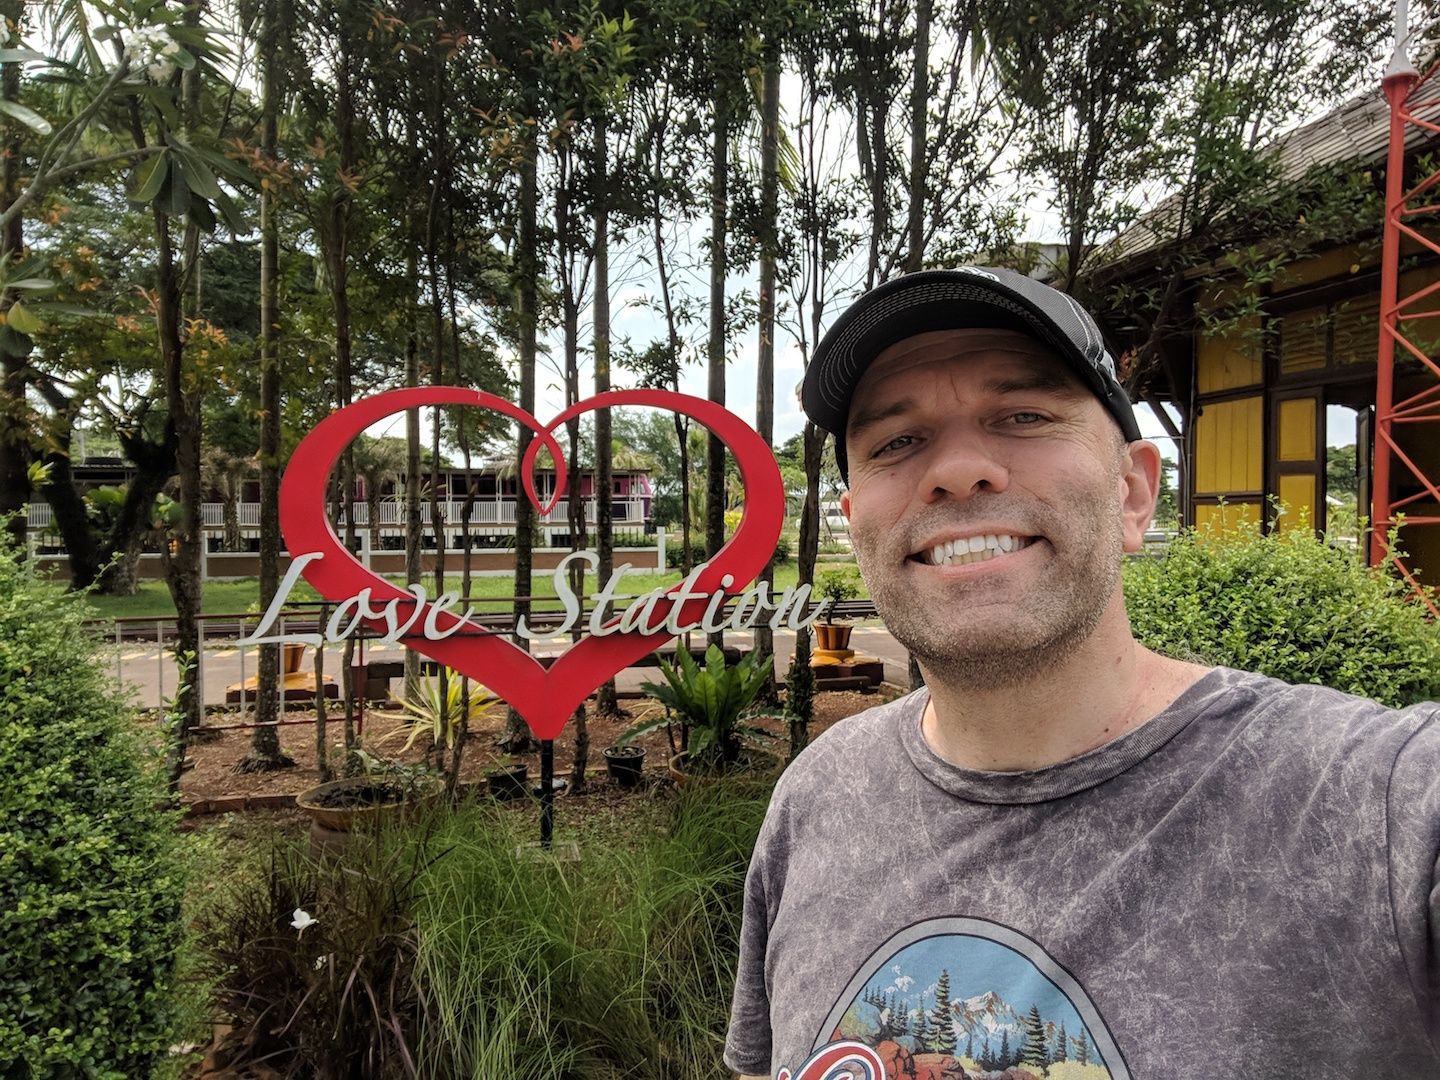 Caption: A photo of Local Guide Joseph Dewey smiling outside near a sign that says “Love Station.” (Local Guide @JosephDewey)